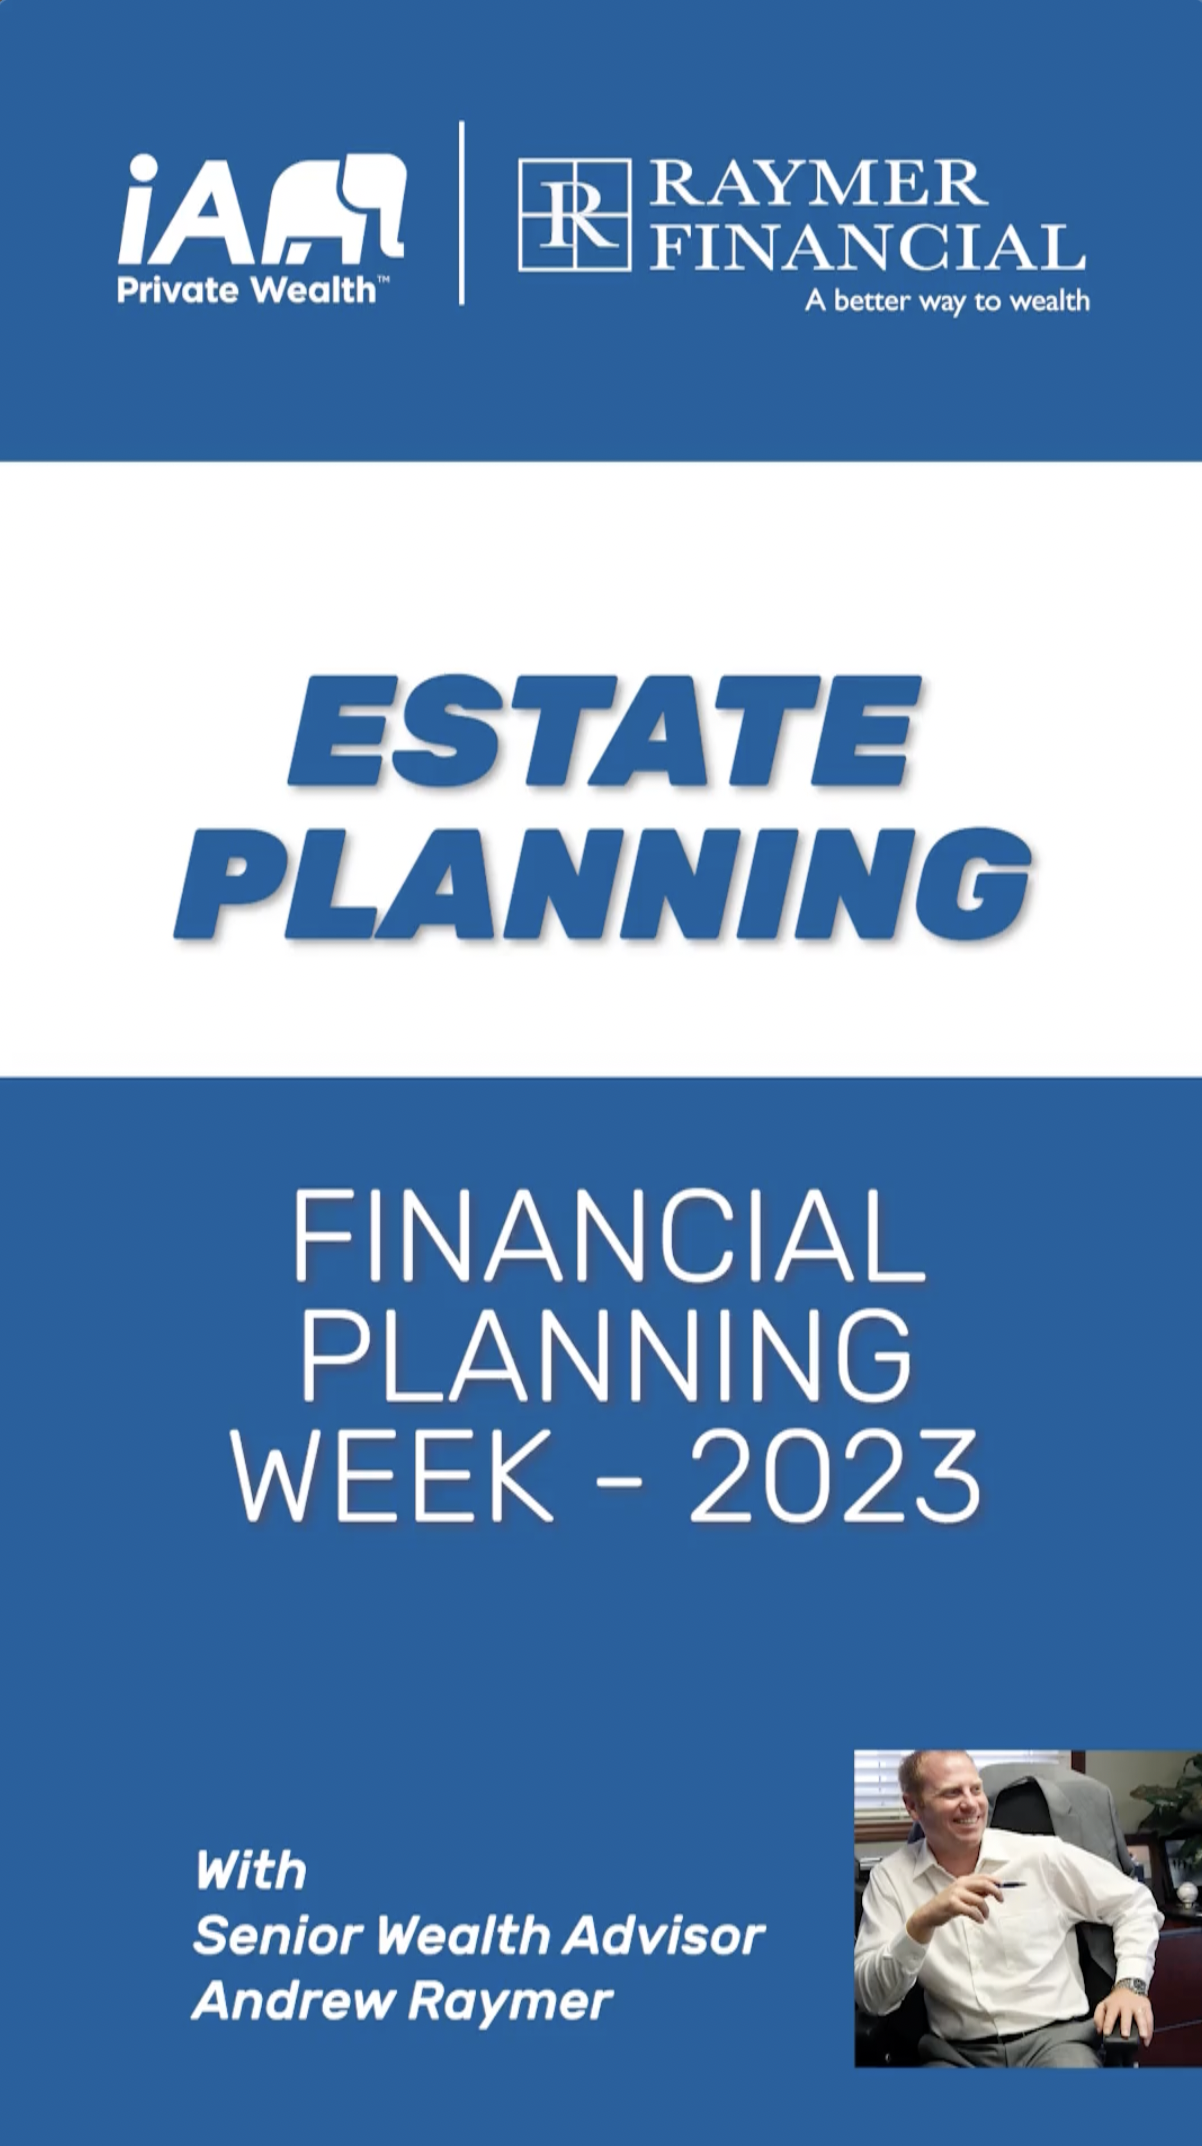 Andrew Raymer discusses Estate Planning